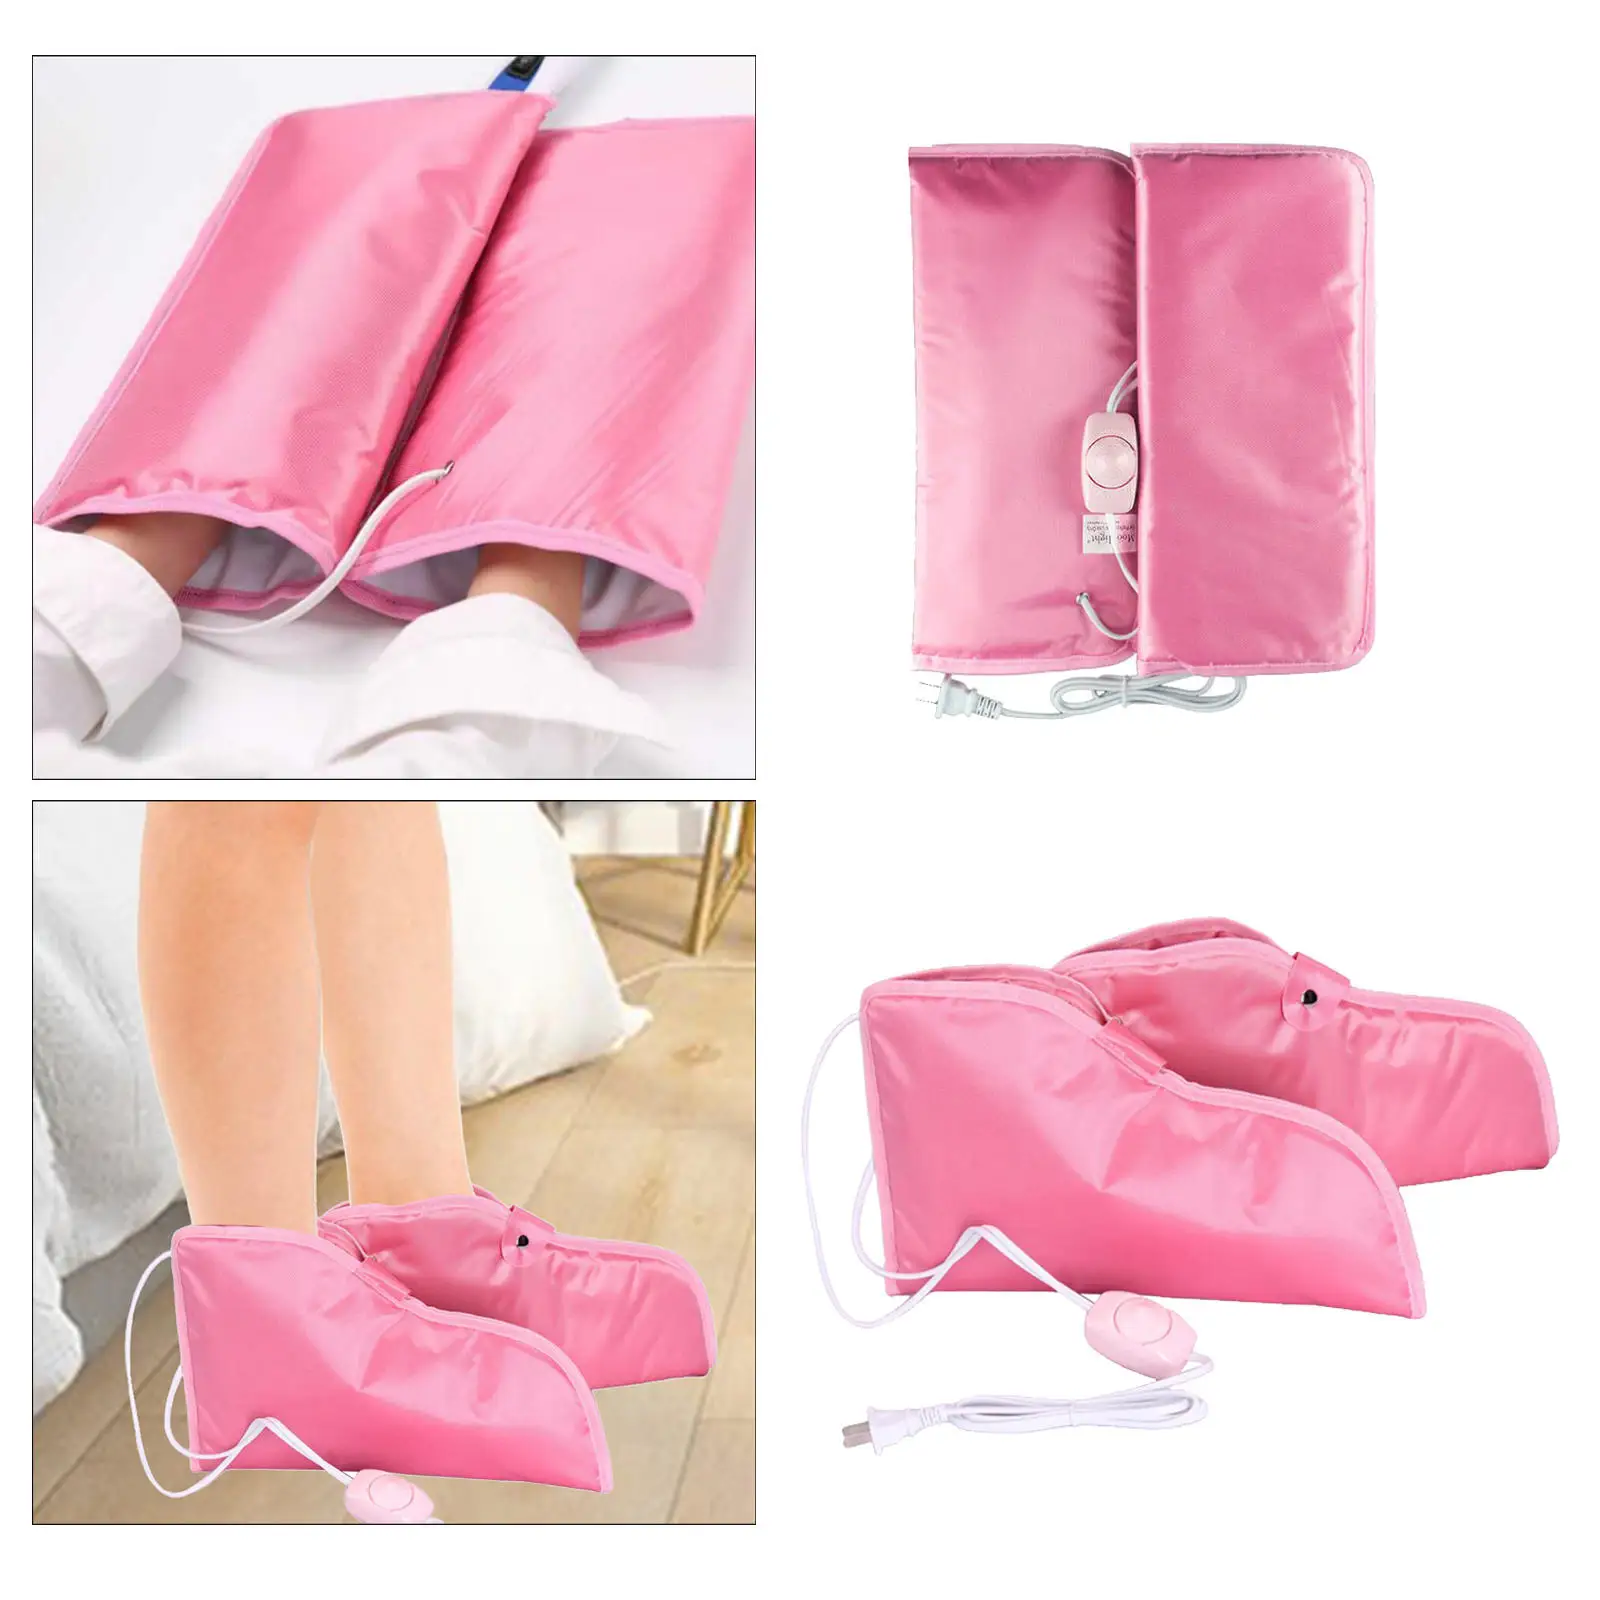 Foot Hand Mitts Paraffin Wax Heated 1 Pair Tool SPA Warmer Heated Gloves for Deep Skin Moisturize Smoothens Softens Dry Skin Men